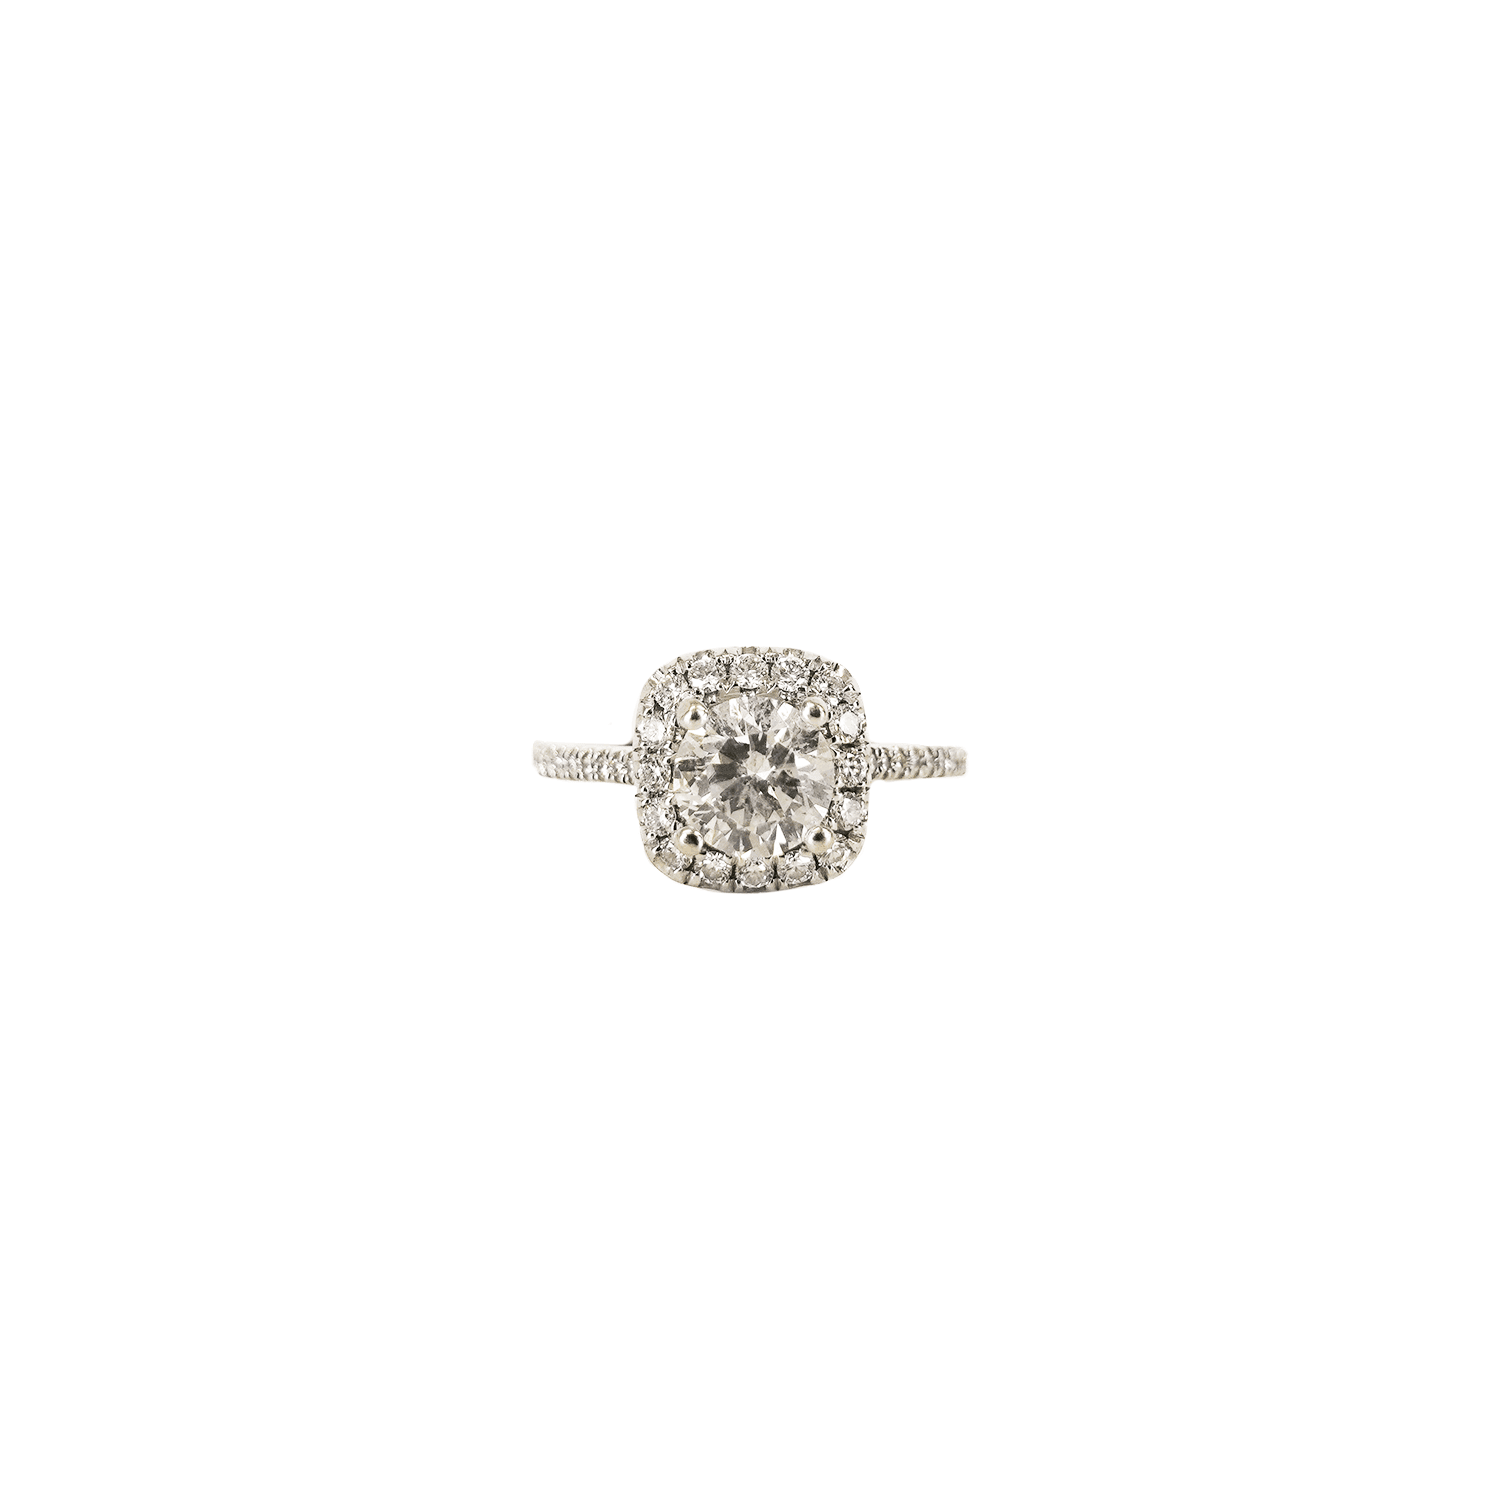 White Gold and Diamond Halo Ring - 6.5 - Fashionably Yours